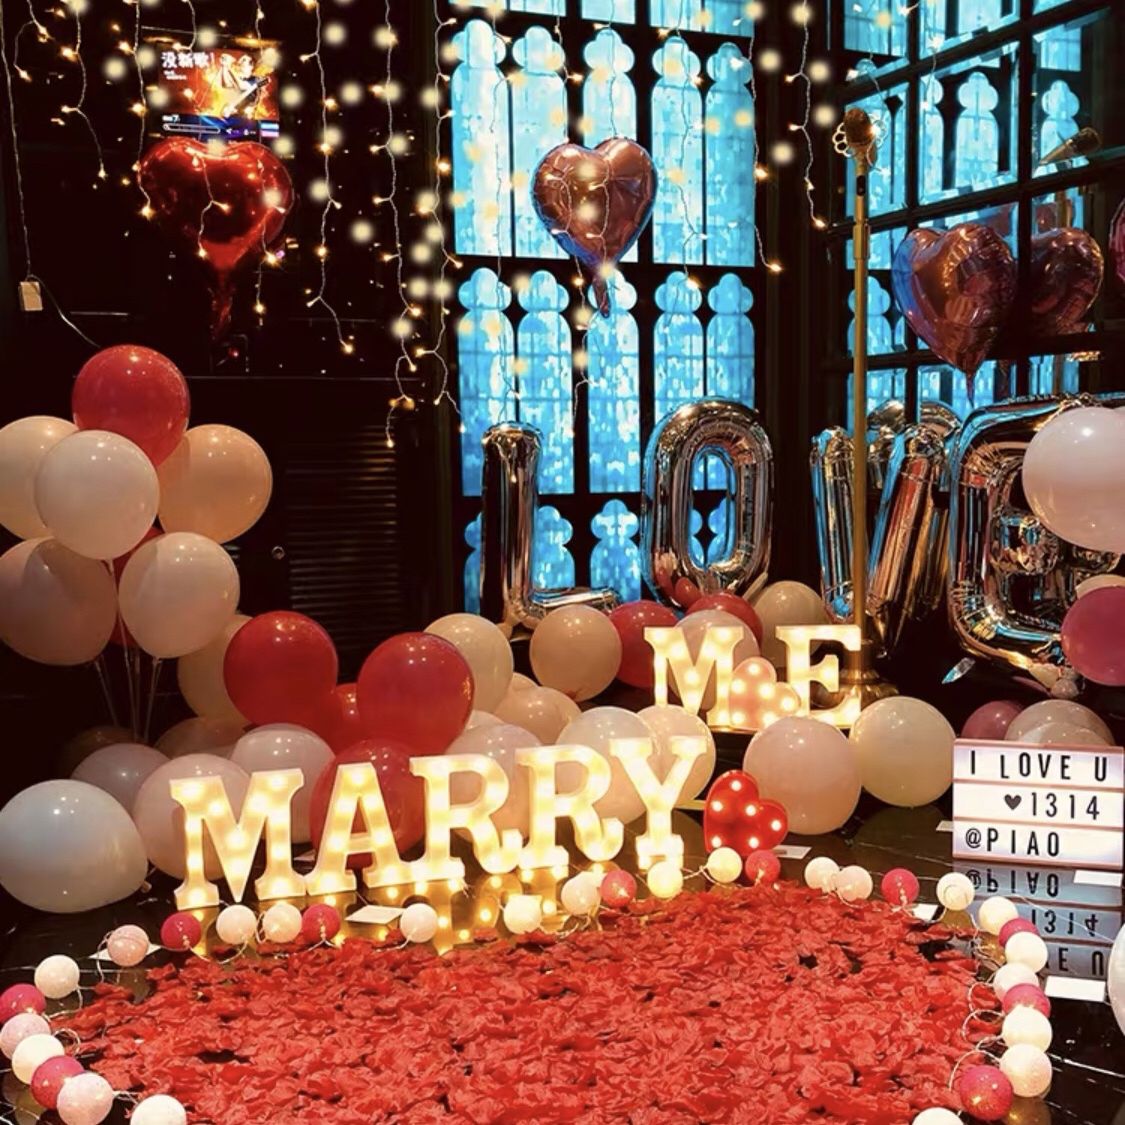 Proposal Luxury Decorations Sets Balloons Candles Love Valentine 